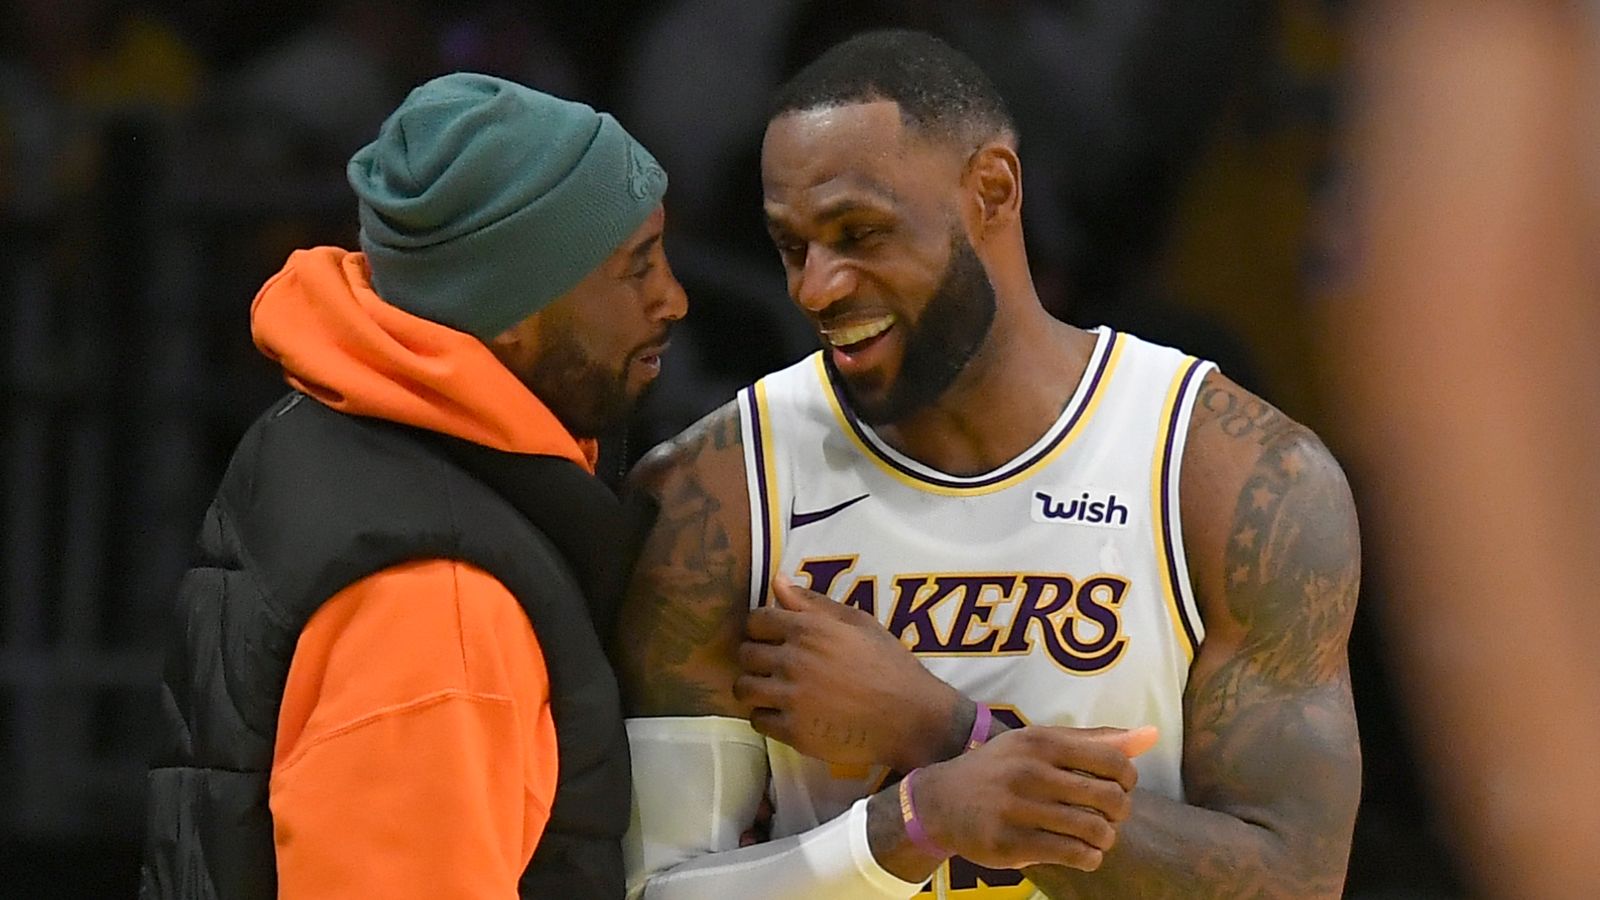 LeBron James shares his favorite moment in Purple & Gold for LA